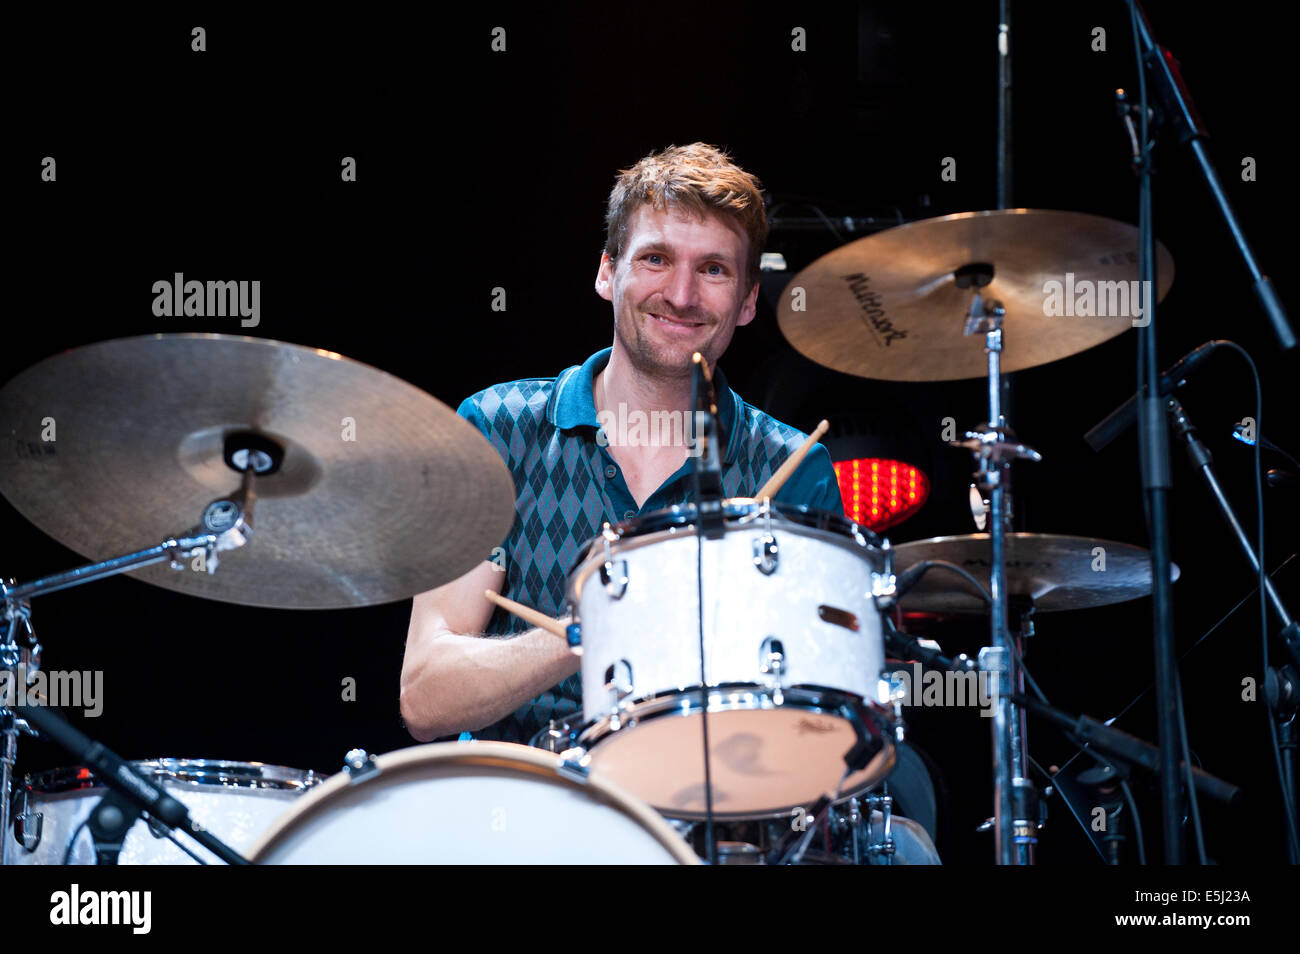 Freiburg, Germany. 1st August, 2014. Nicolai Ziel (drums) from The Island Orchestra (Inselorchester) performs at the ZMF music festival in Freiburg, Germany. Photo: Miroslav Dakov/ Alamy Live News Stock Photo